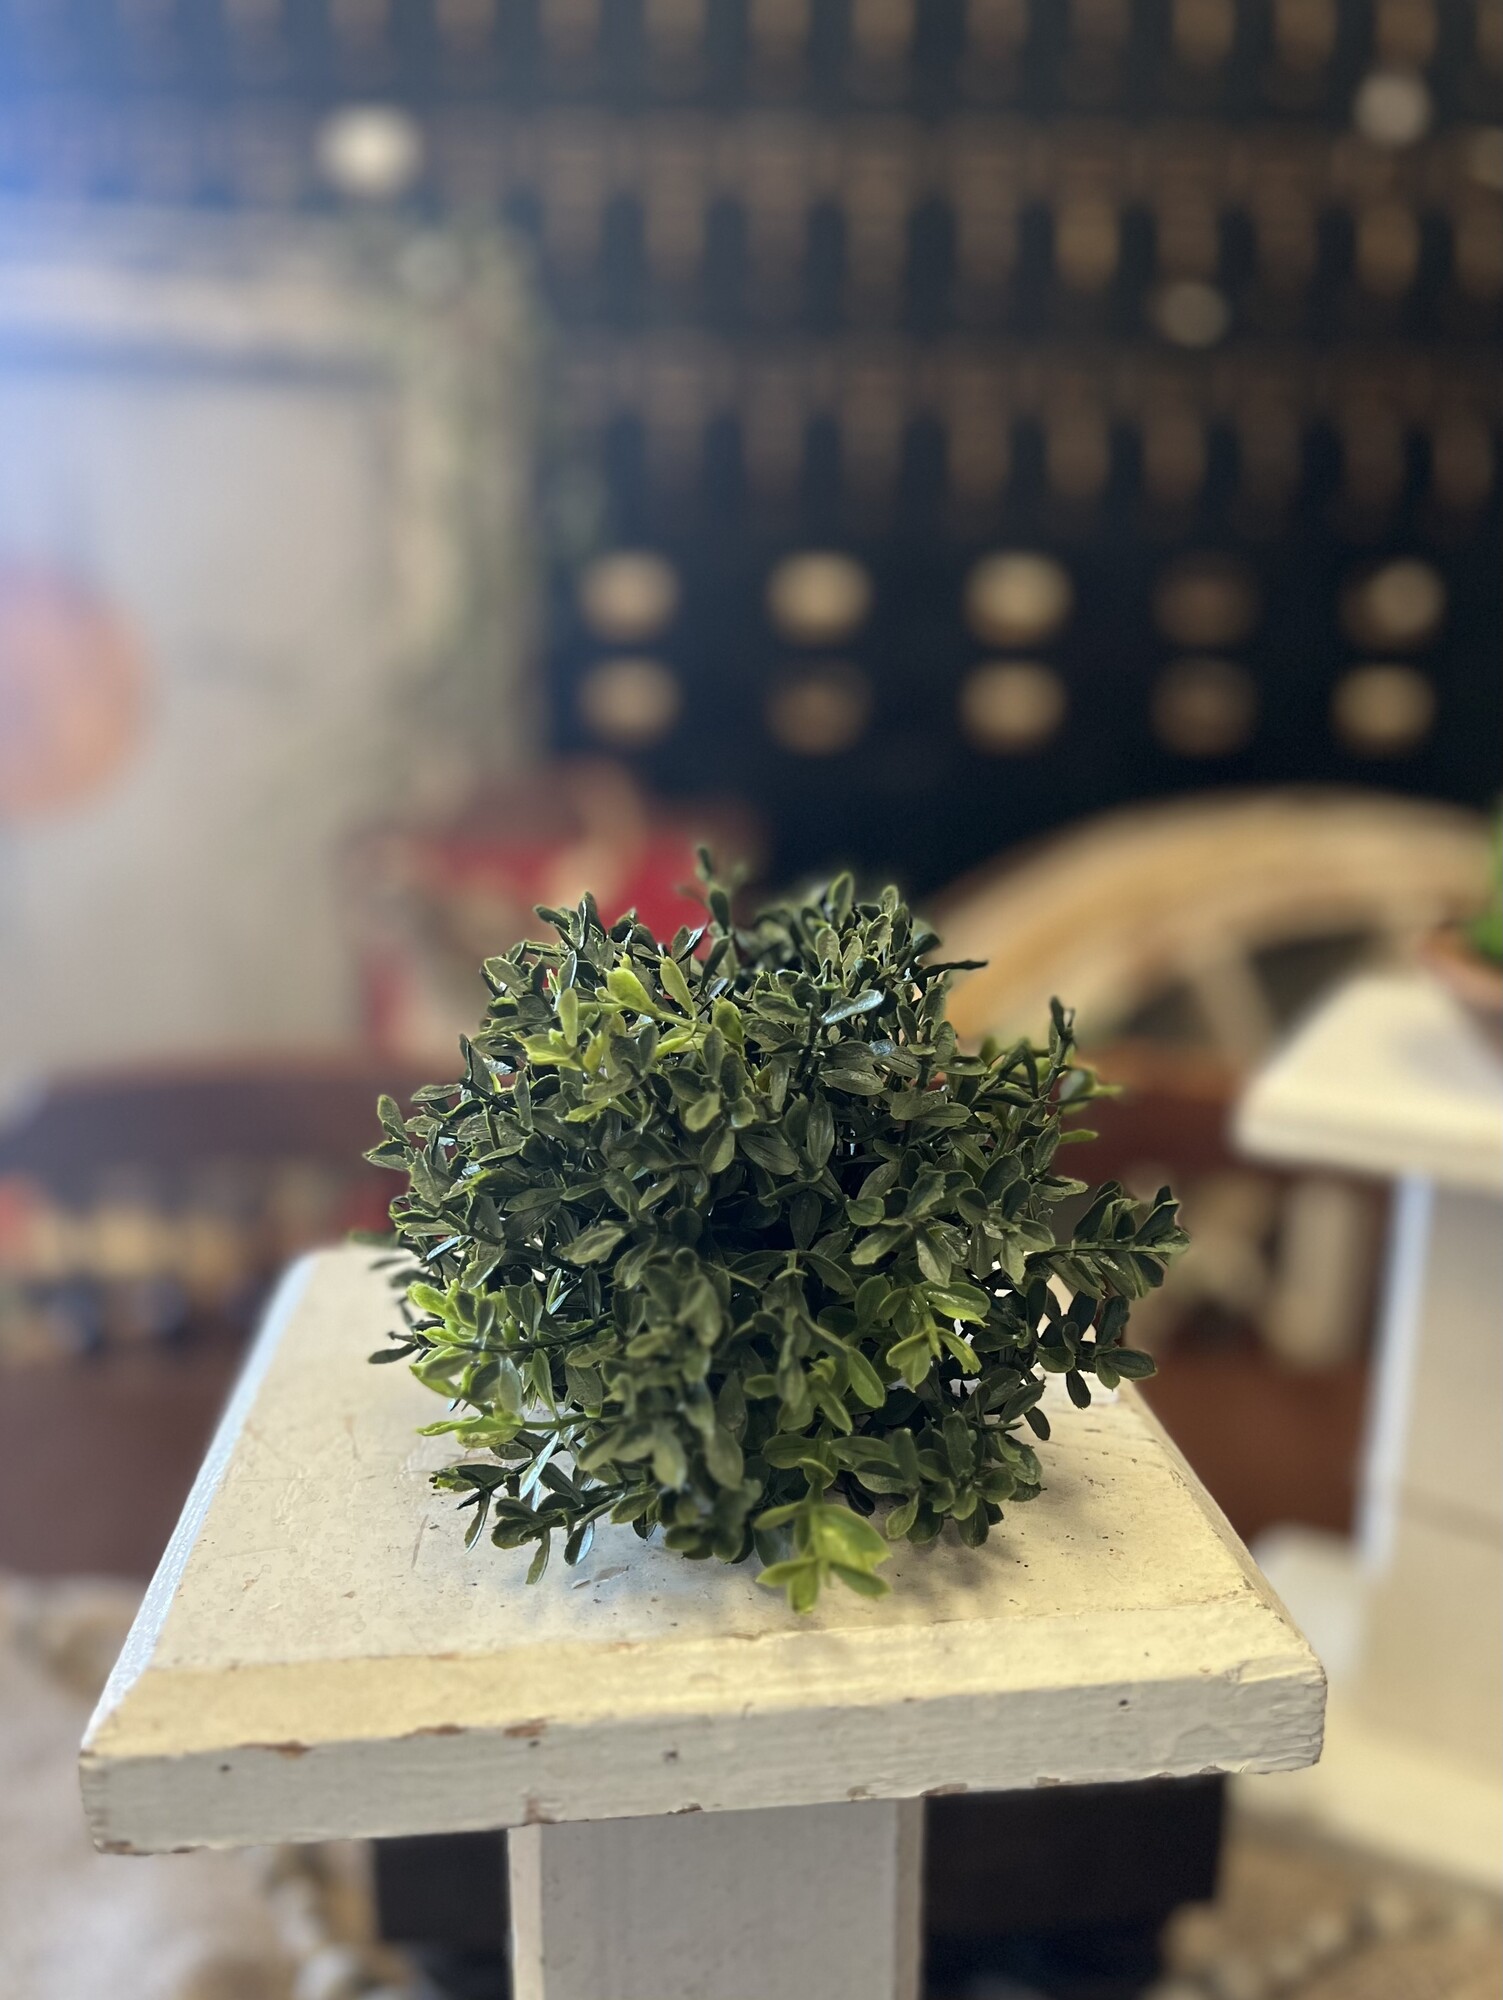 New England Boxwood half sphere features neutral green boxwood with a half sphere shape and flat base. Sphere can easily be displayed in a bowl or atop a vase or platform to add a touch of greenery to any room
Measures 6 inches in diameter and 4.5 inches high